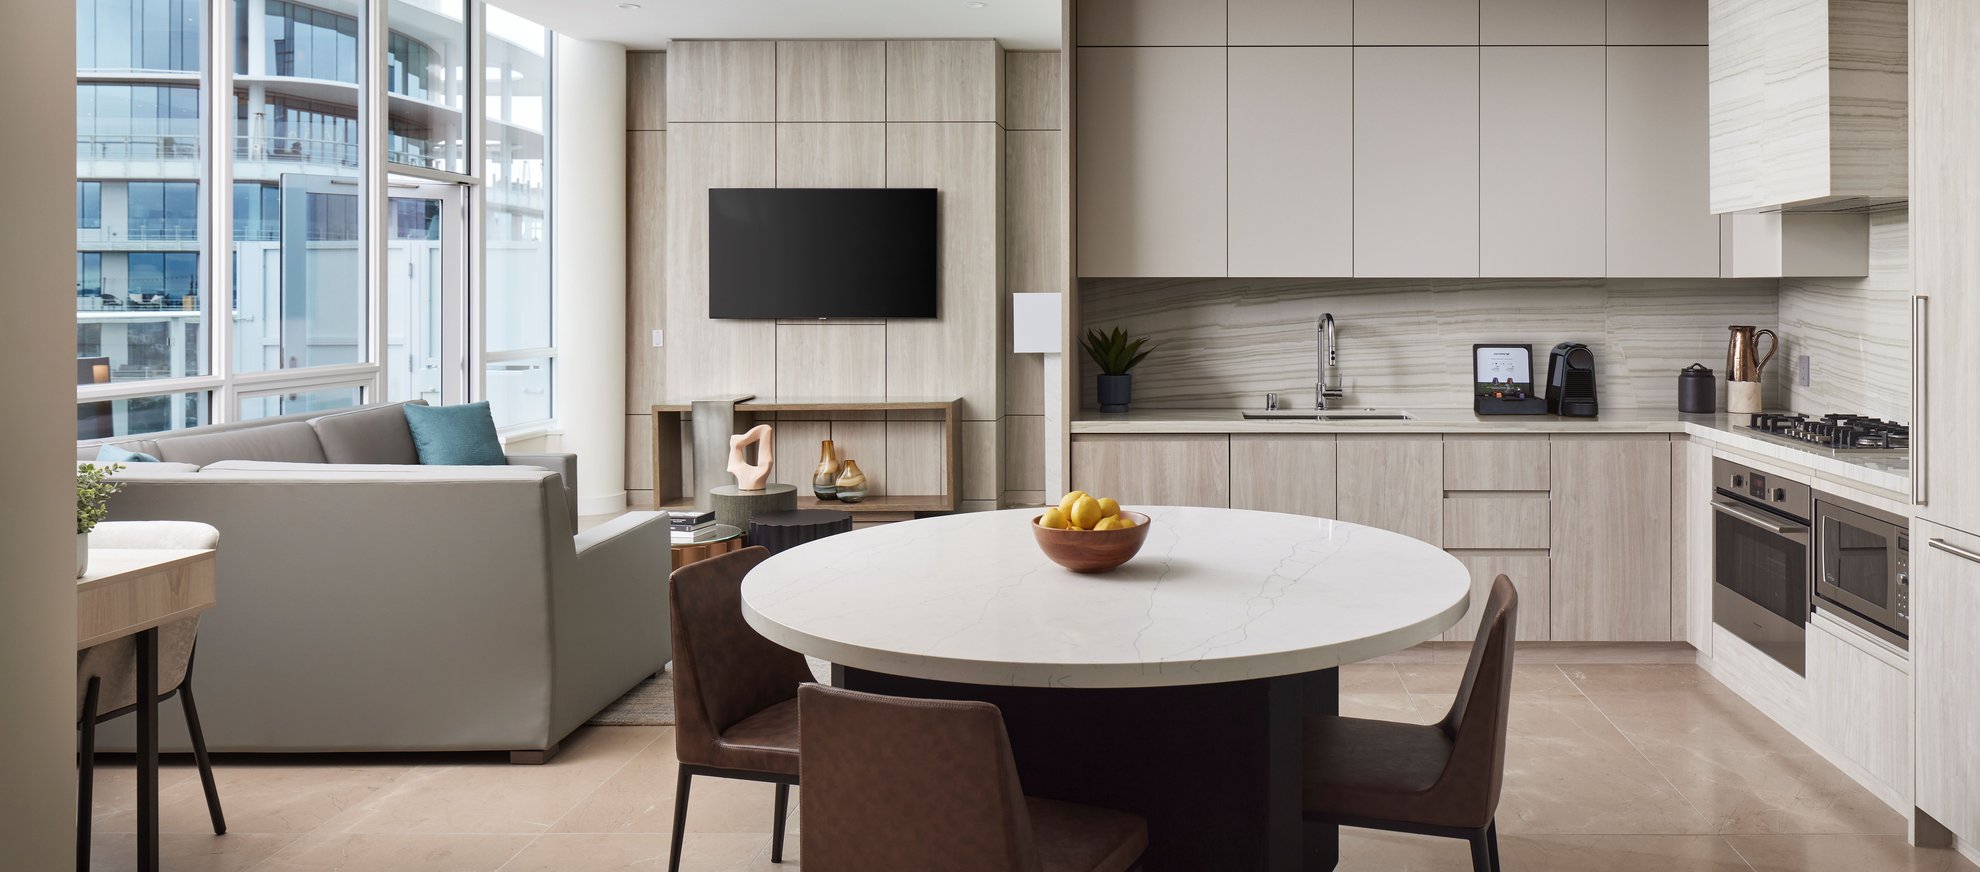 contemporary penthouse living area and kitchen with sleek design and ample seating at Level Seattle south lake union.jpg